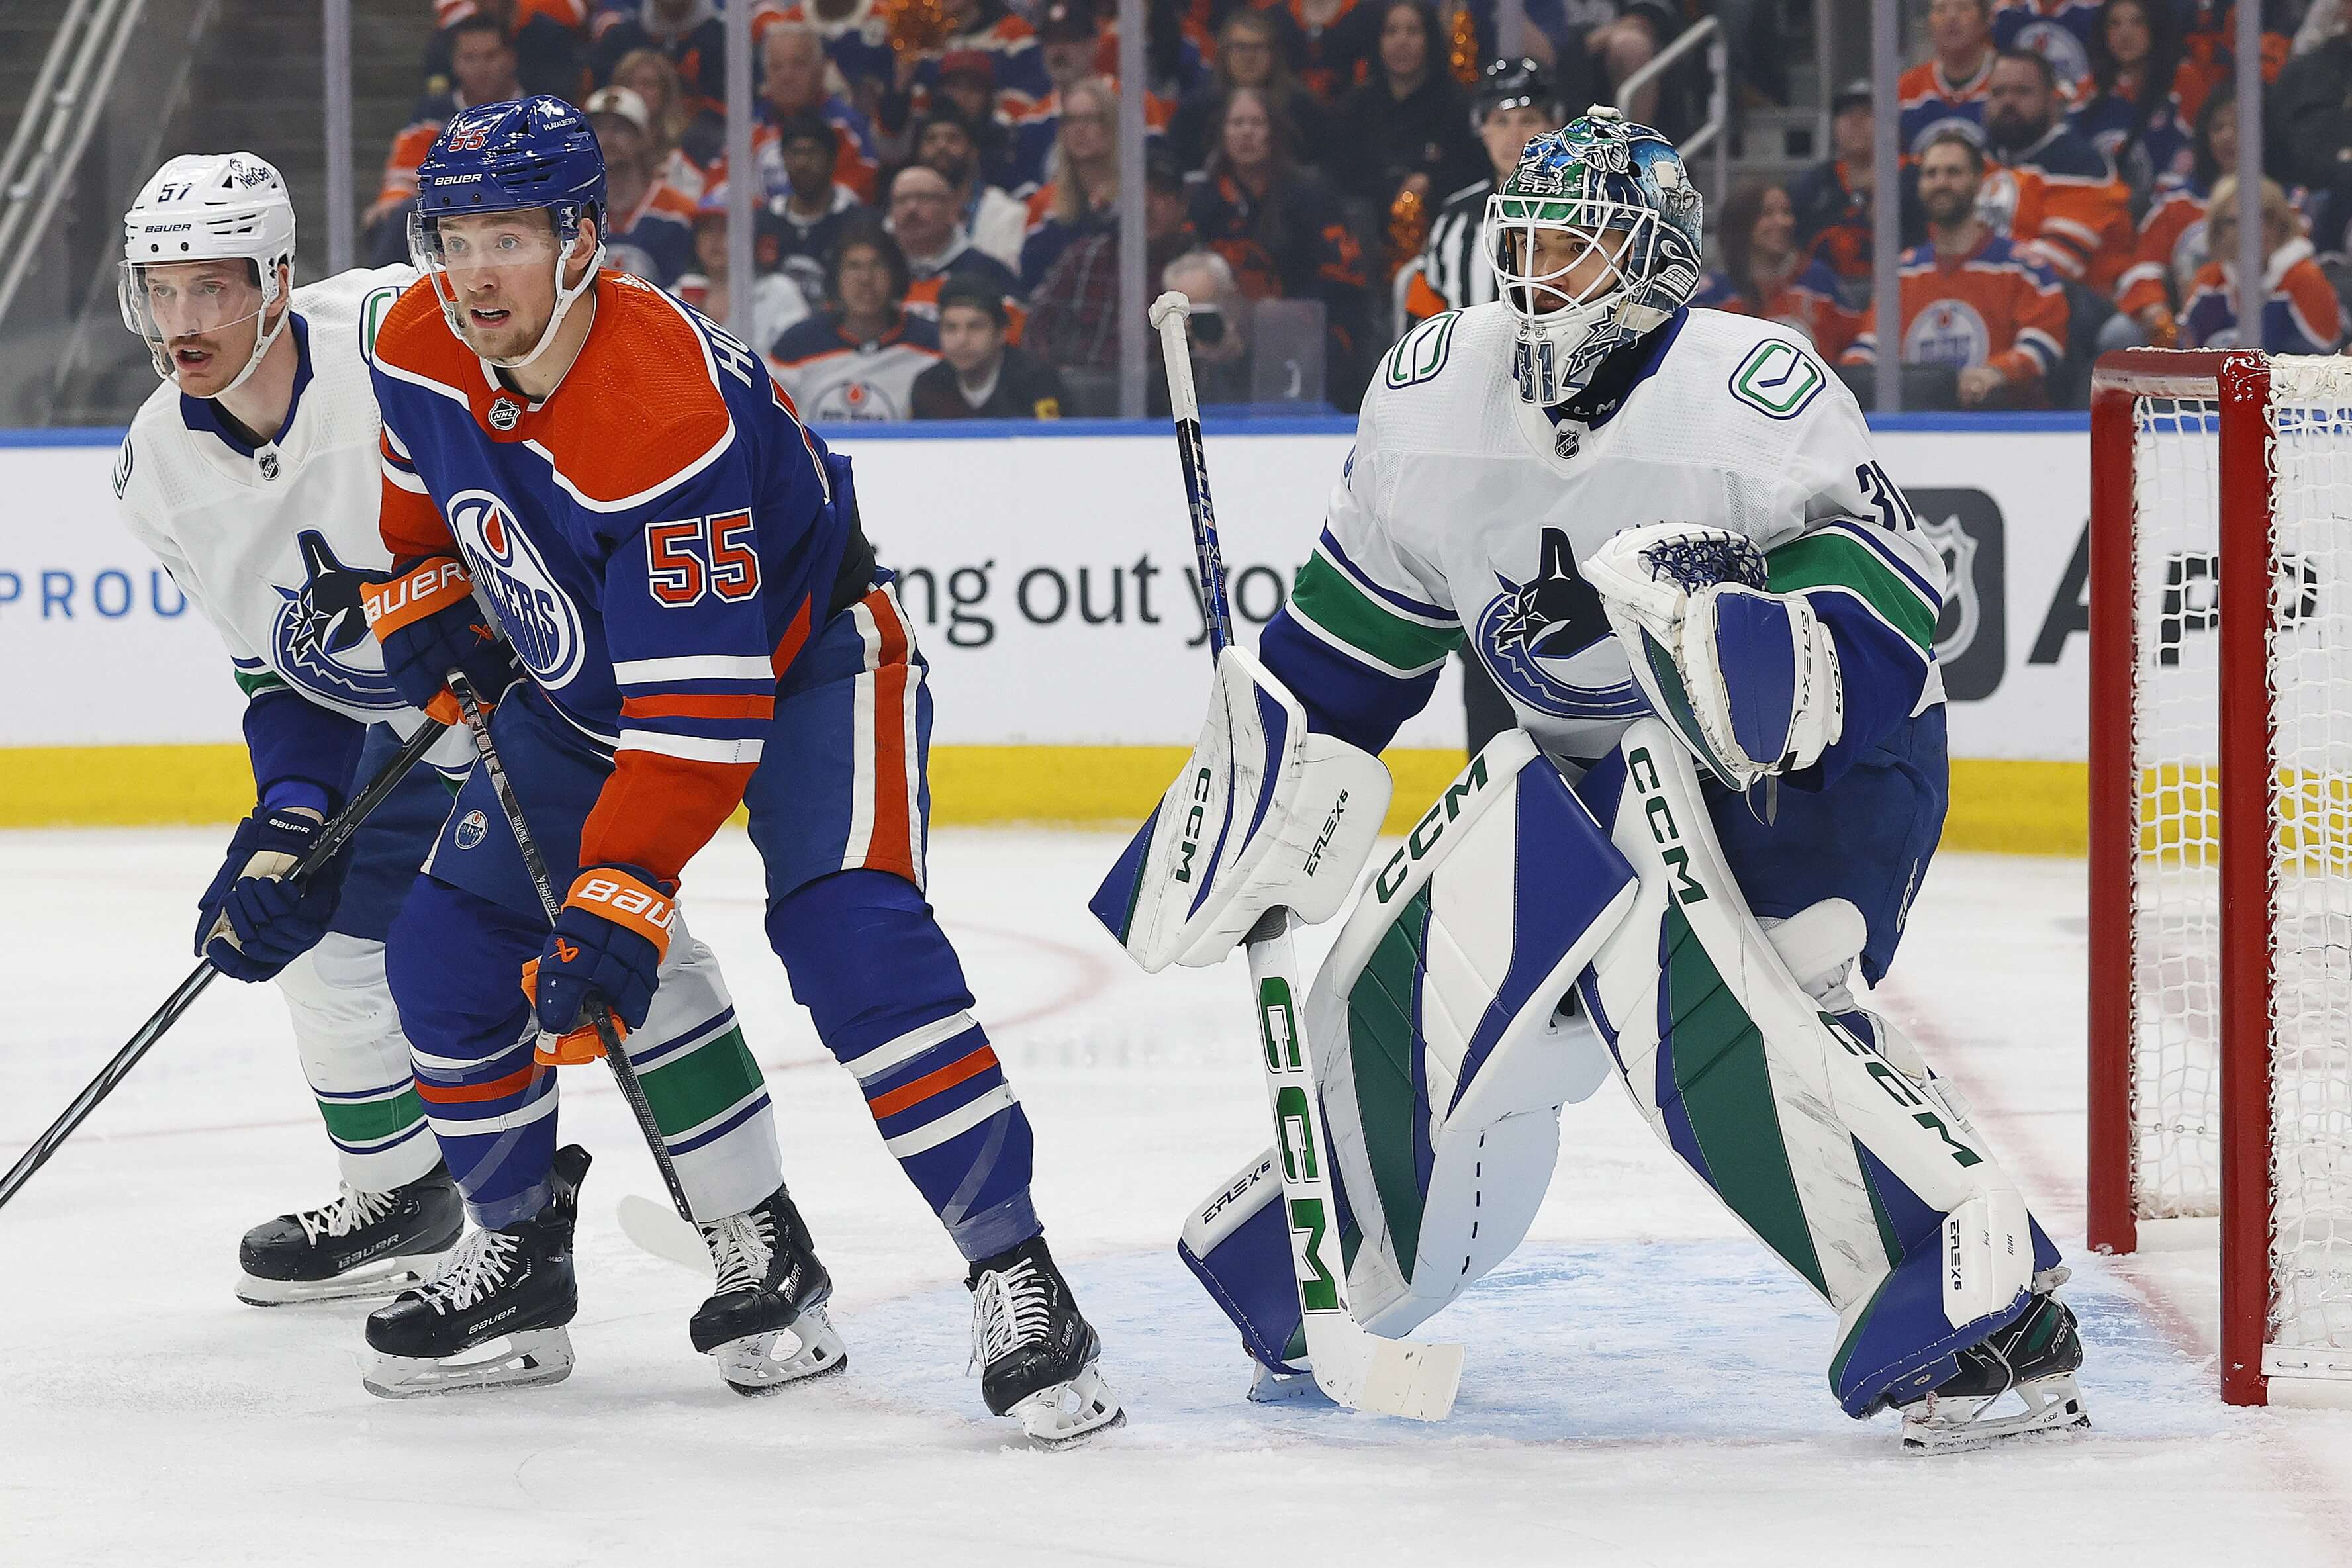 How To Bet - Canucks vs Oilers Prediction, Picks, and Odds for Saturday's NHL Playoff Game